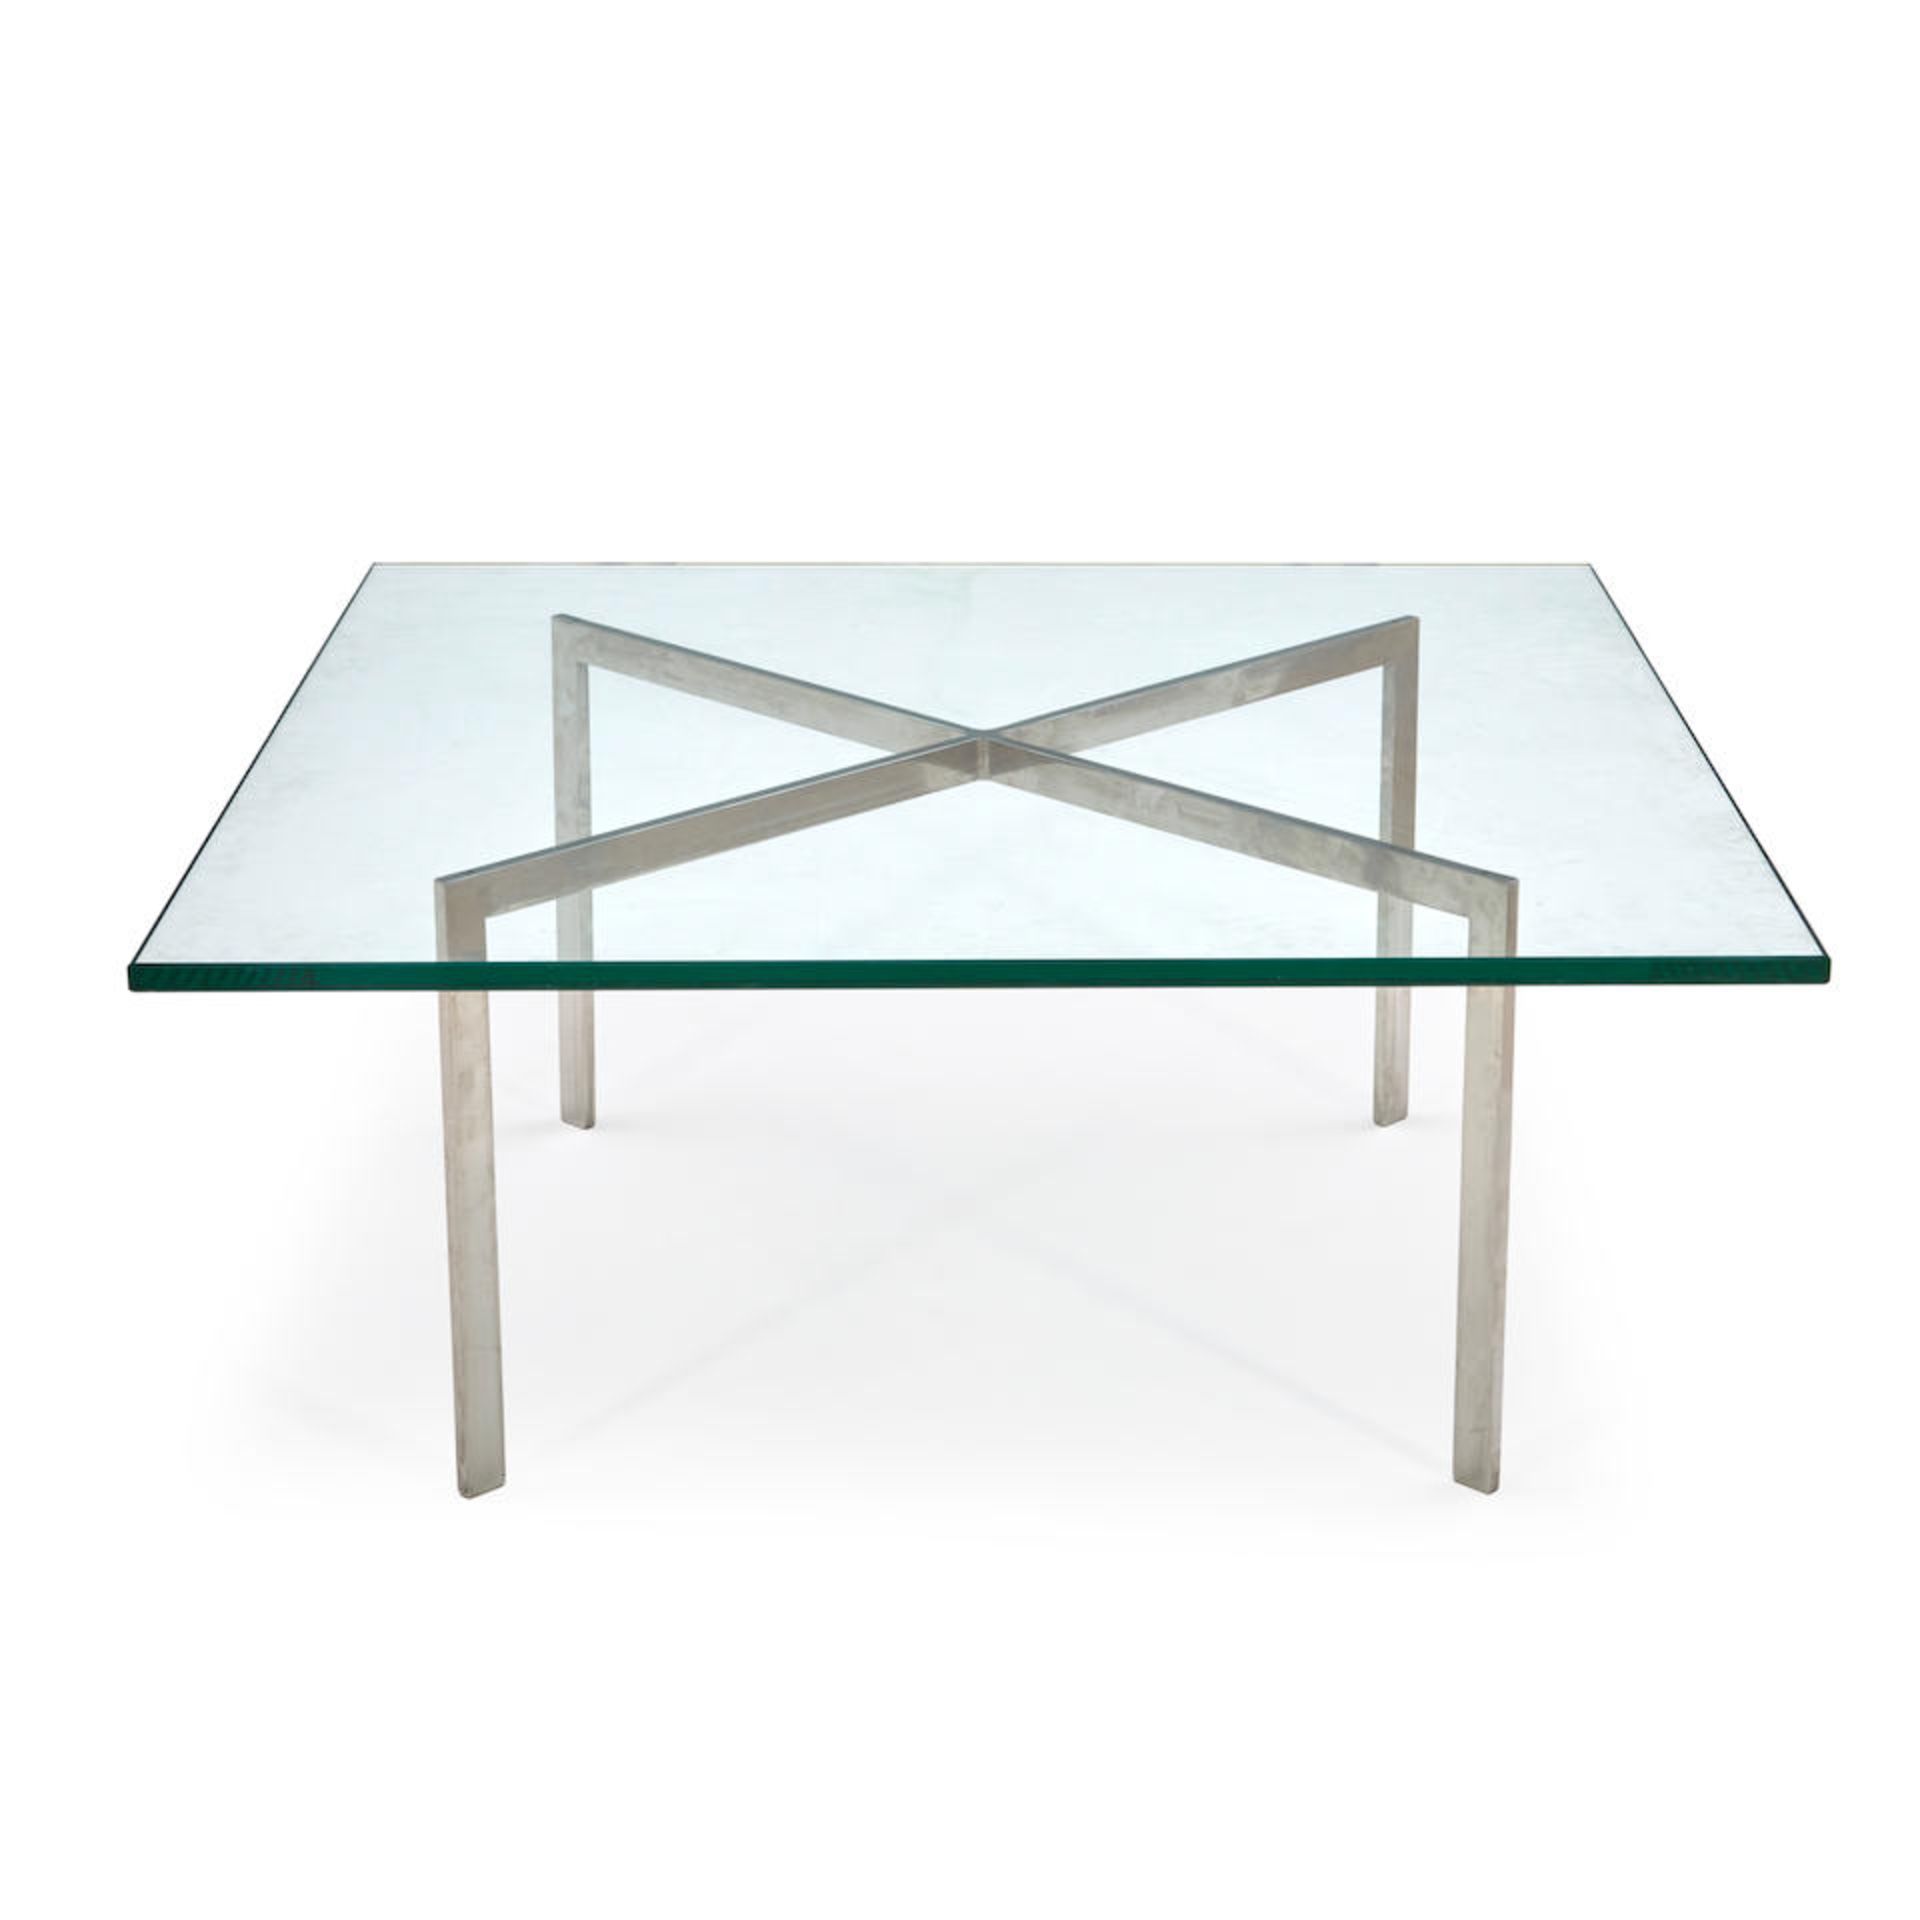 MIES VAN DER ROHE BARCELONA-STYLE COFFEE TABLE, late 20th century, chromed steel, glass, unmarke...